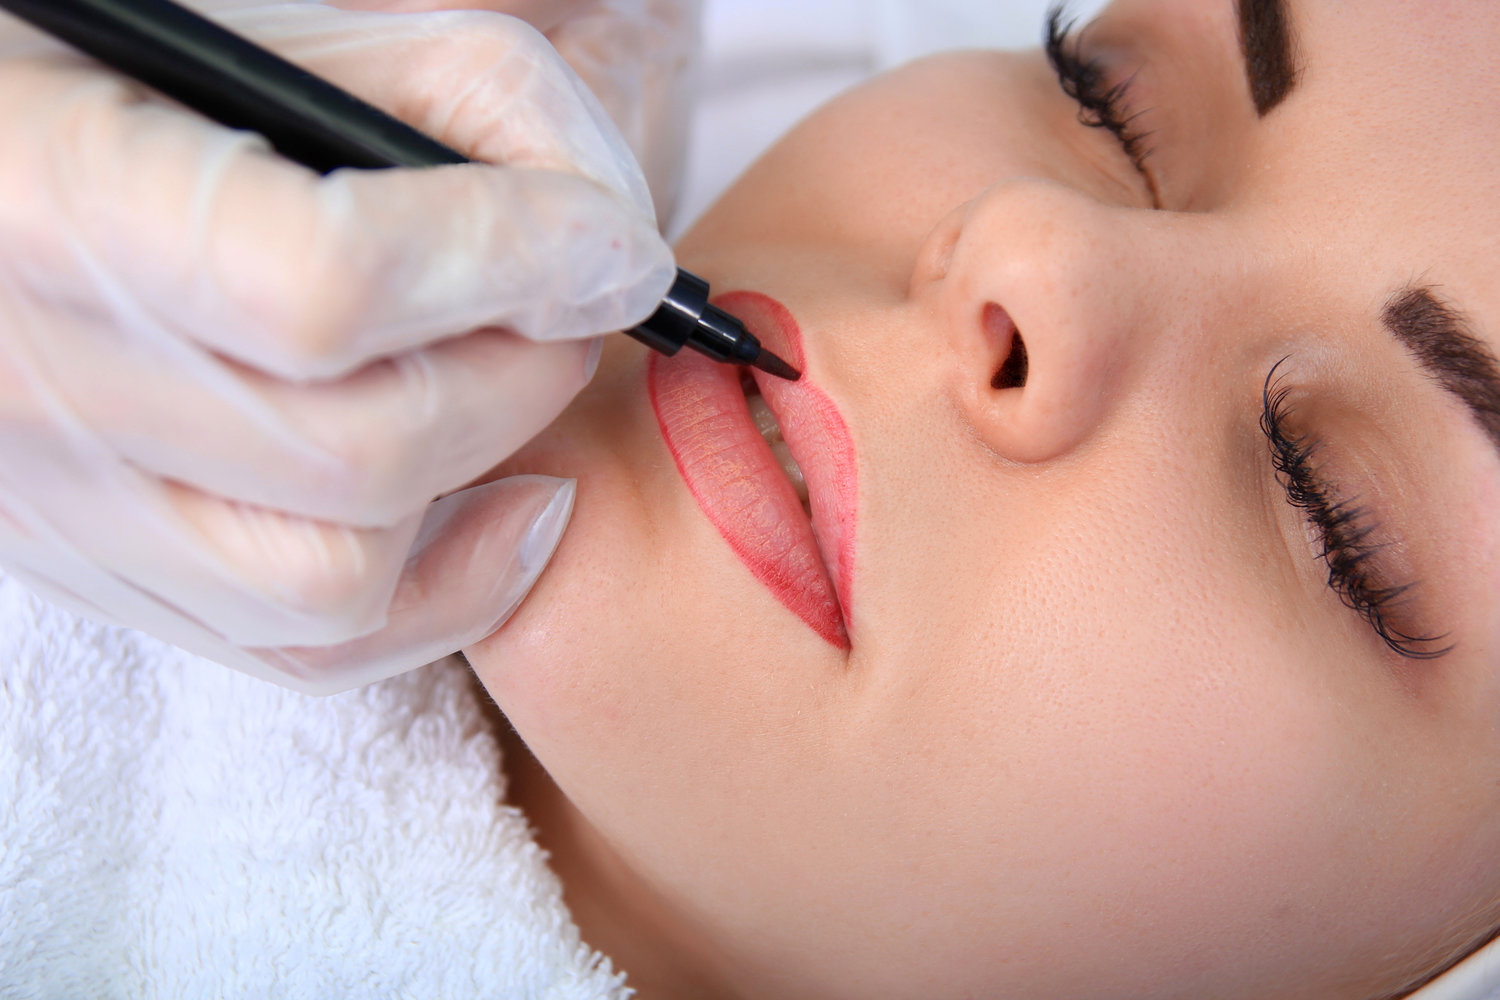 Eyebrow Permanent Makeup Aftercare - The Do's and Don'ts after PMU